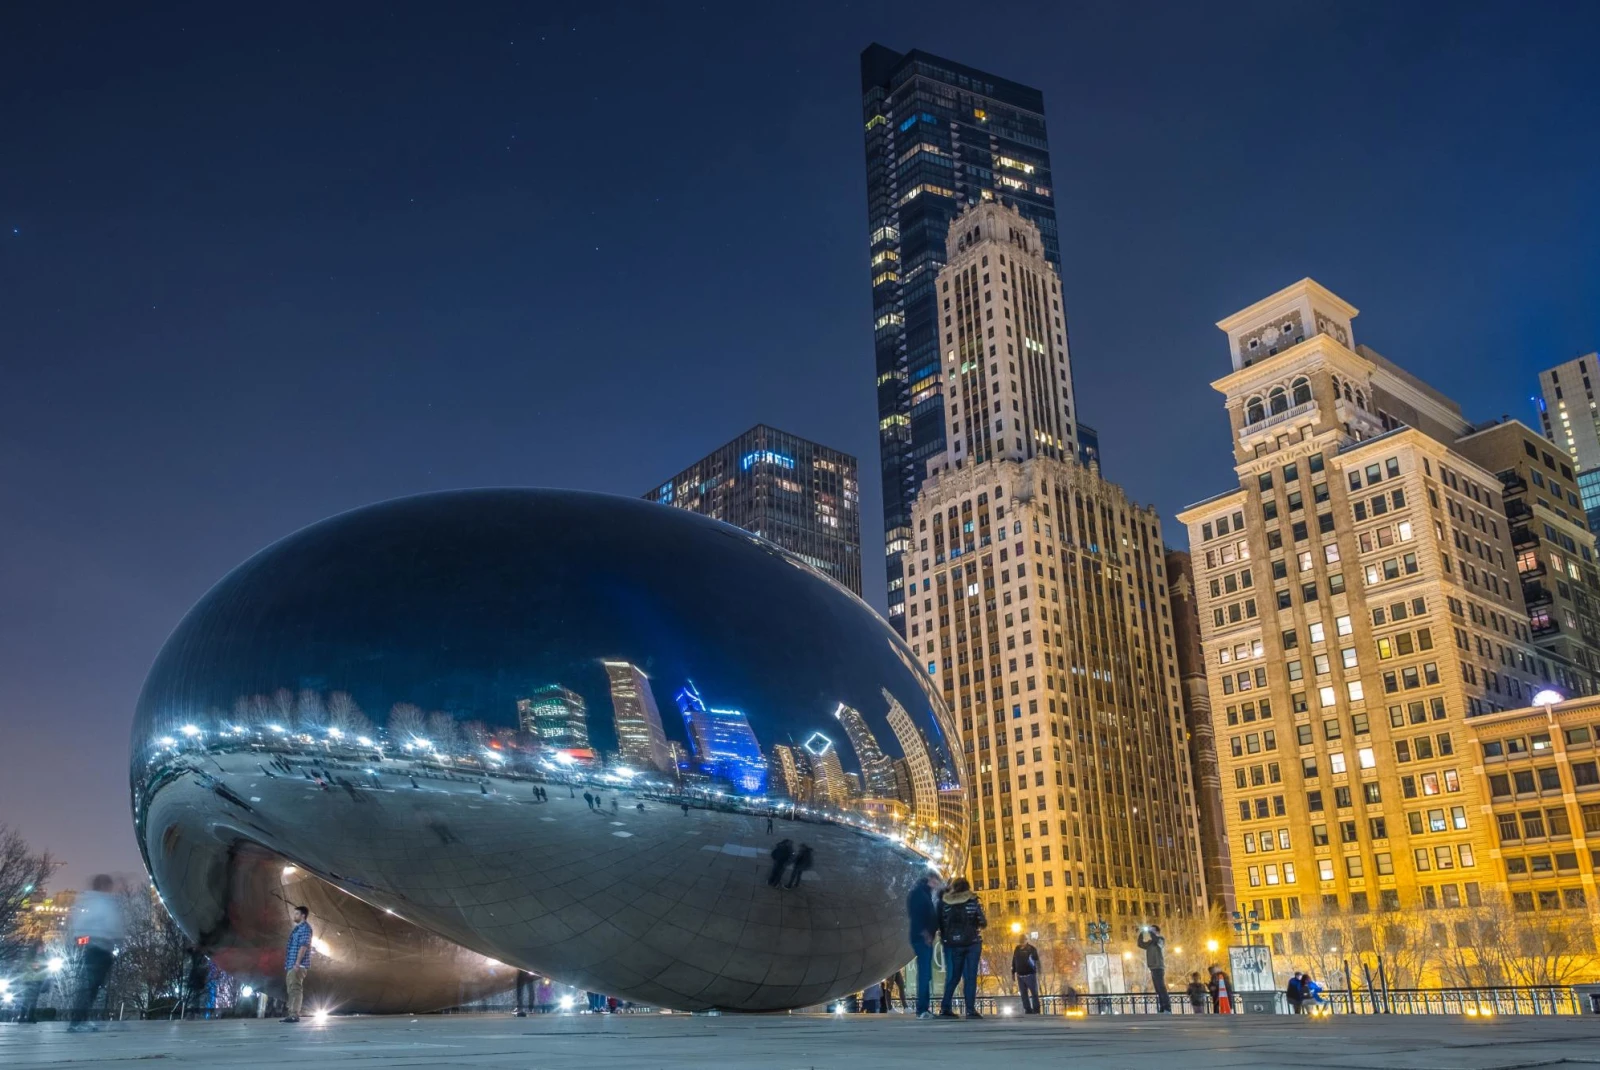 the famous bean sculpture of Chicago's Millennium Park reflects the downtown city scape at night 